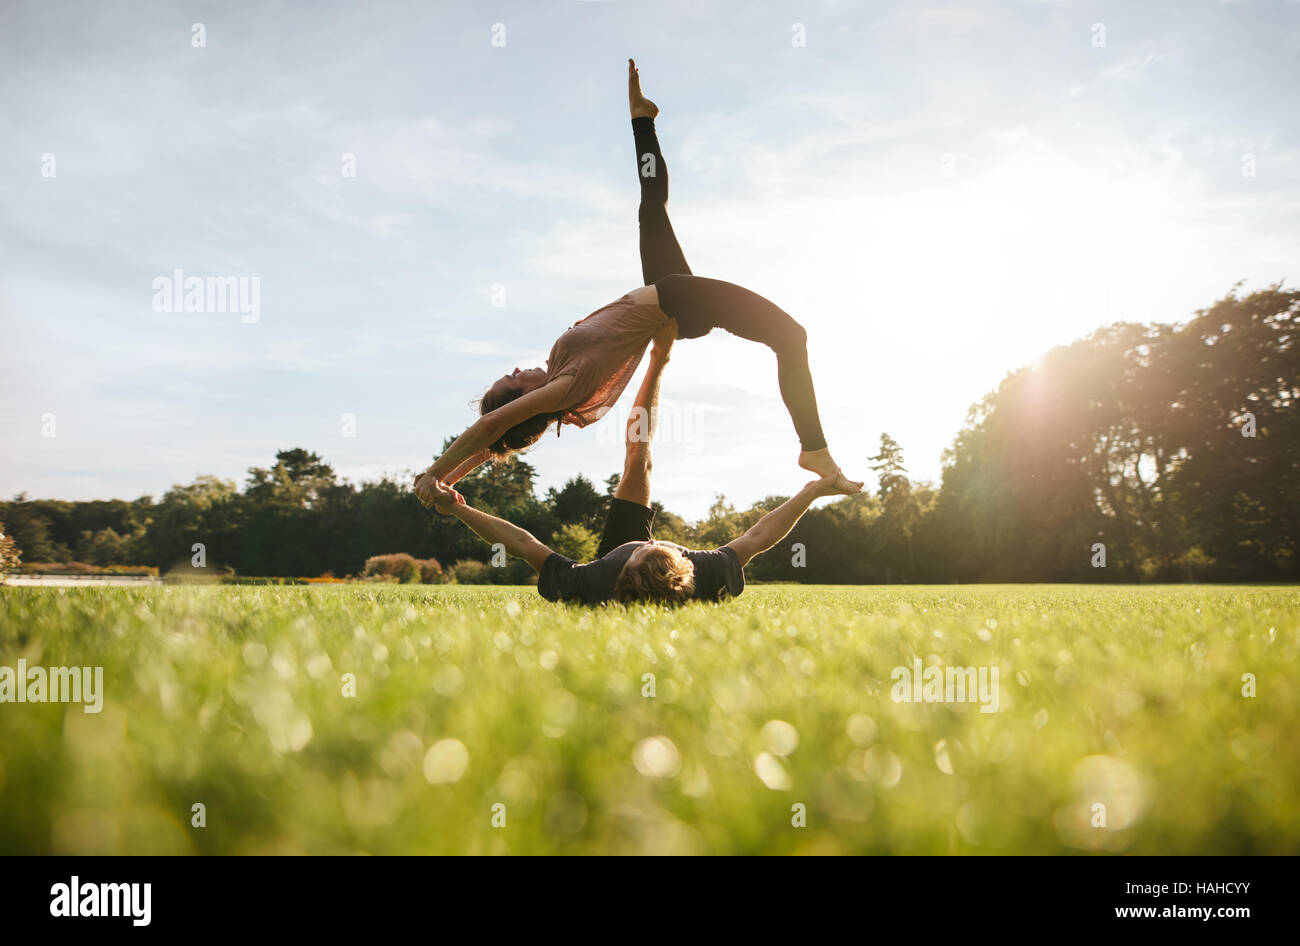 Shot of young couple doing acrobatic yoga on lawn. Young man lifting and balancing woman at the park. Stock Photo